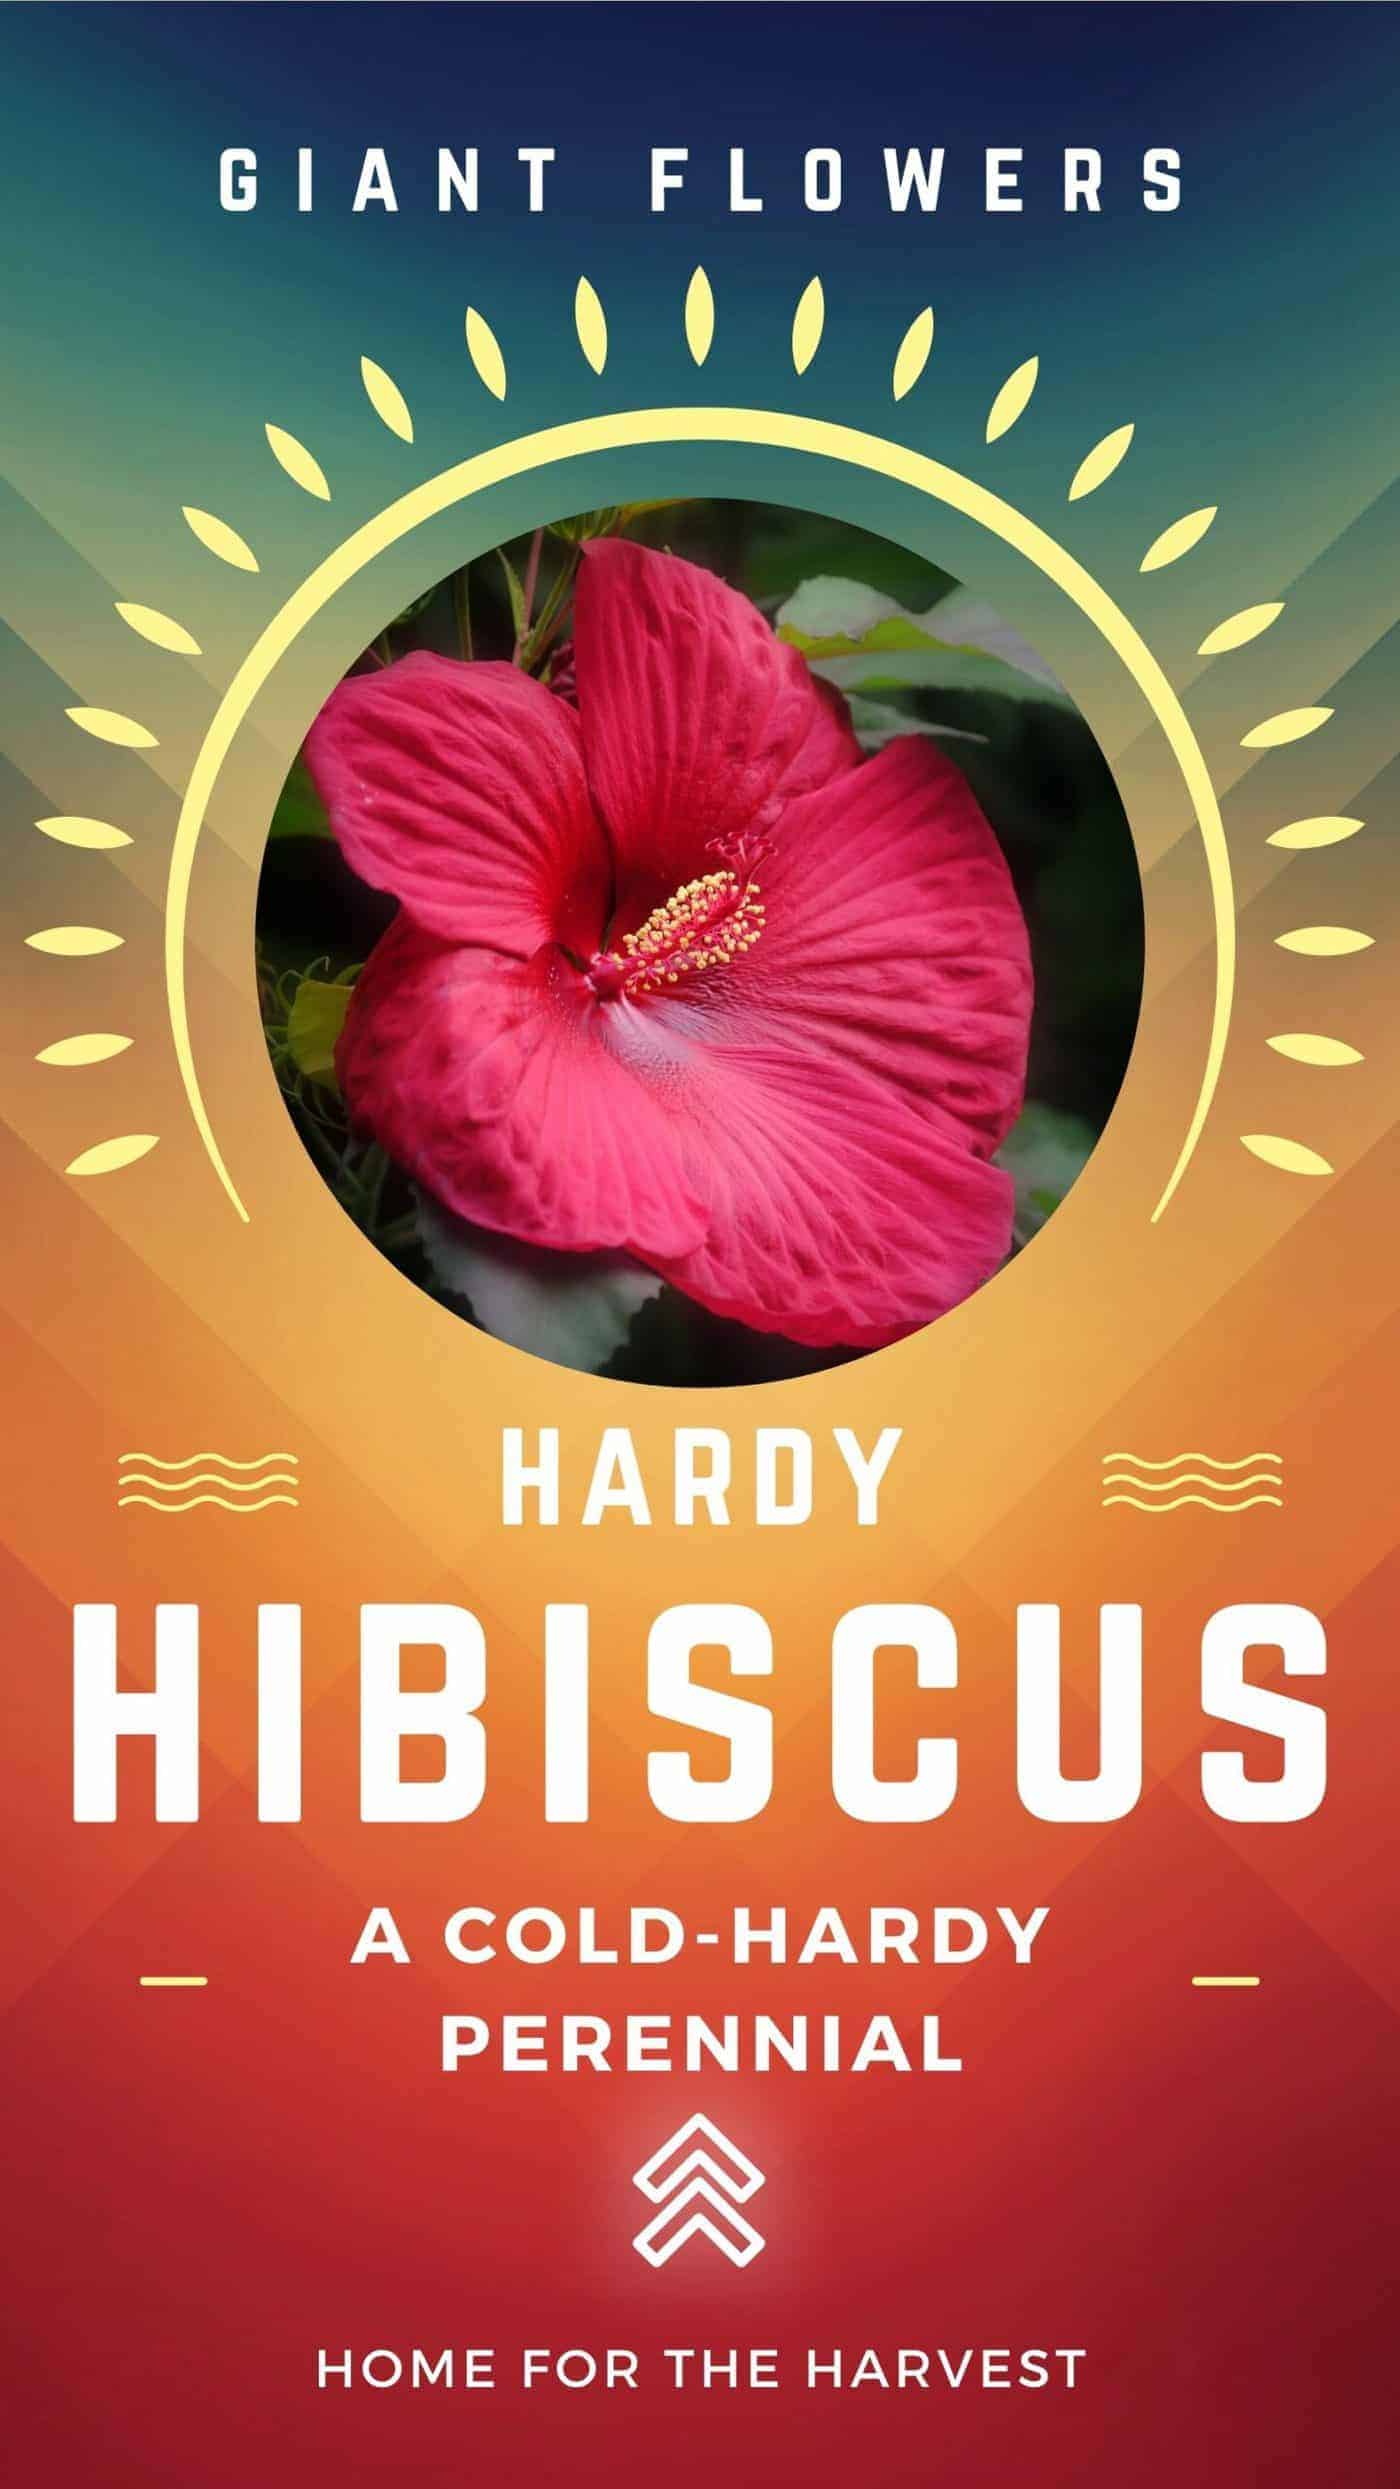 Hardy hibiscus flowers - dinner plate hibiscus - cold hardy perennial via @home4theharvest